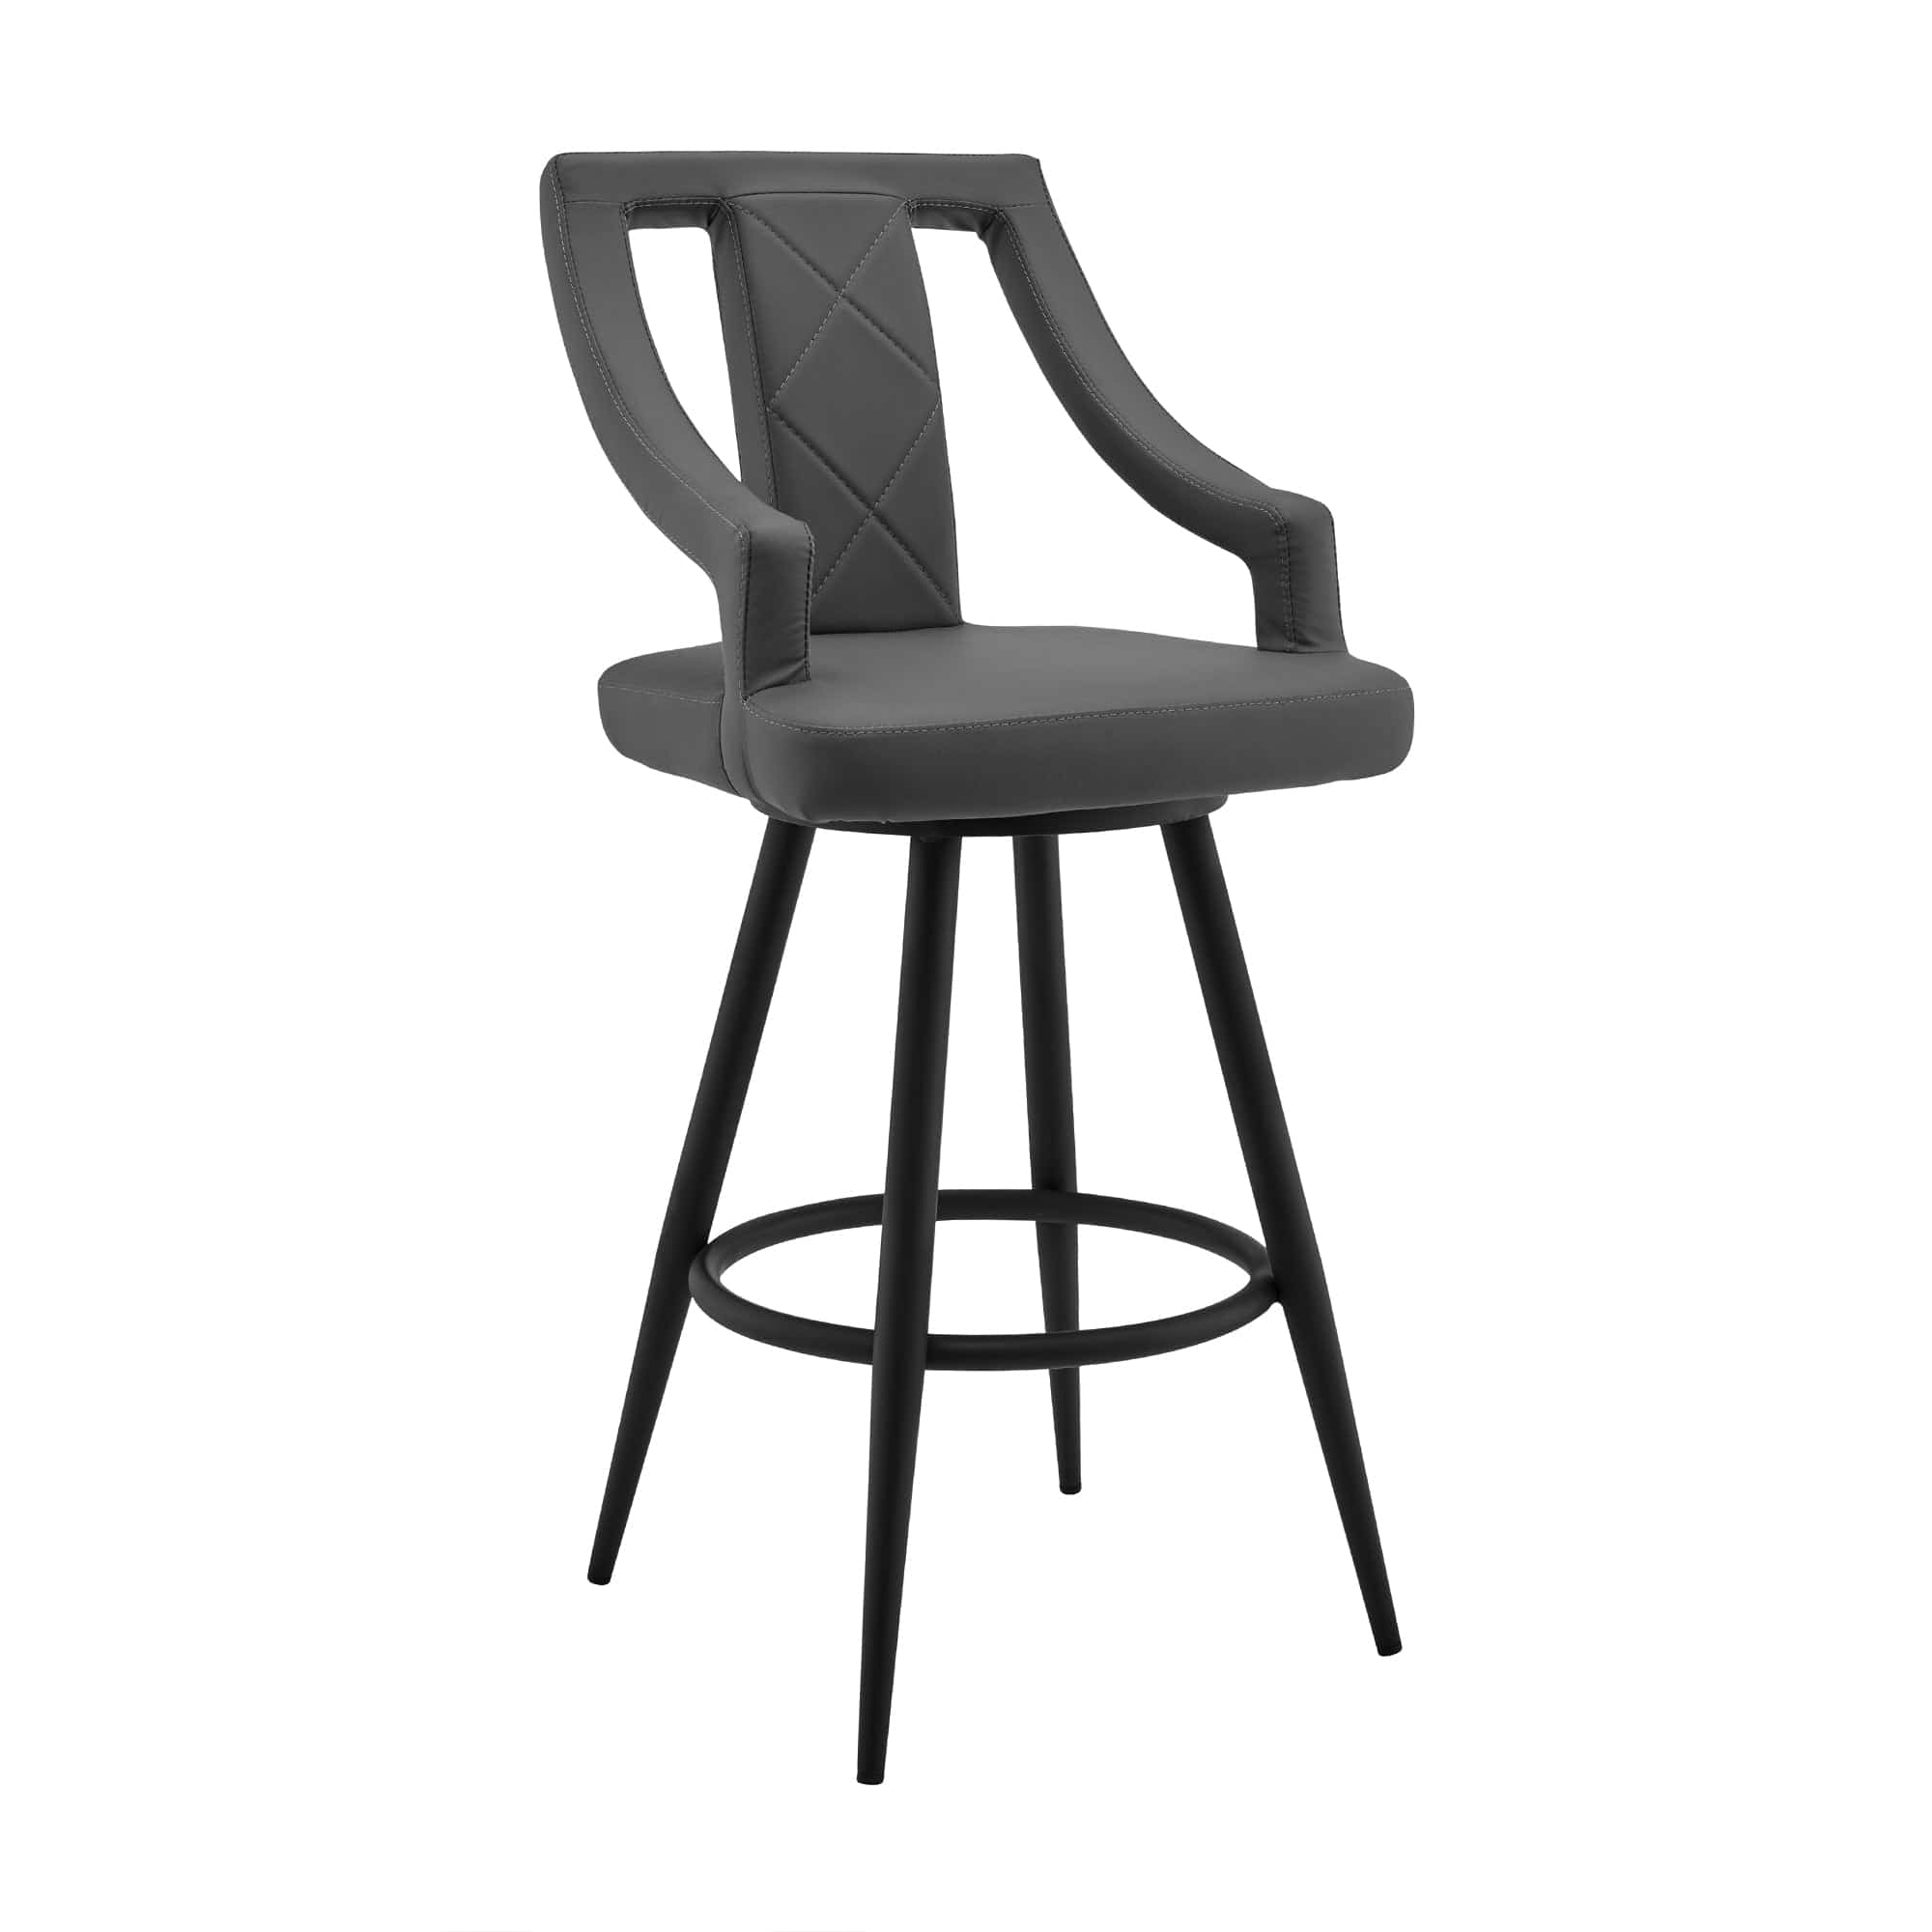 Armen Living Barstool Armen Living - Maxen 30" Gray Faux Leather and Brushed Stainless Steel Swivel Bar Stool | LCMXBABSGR30